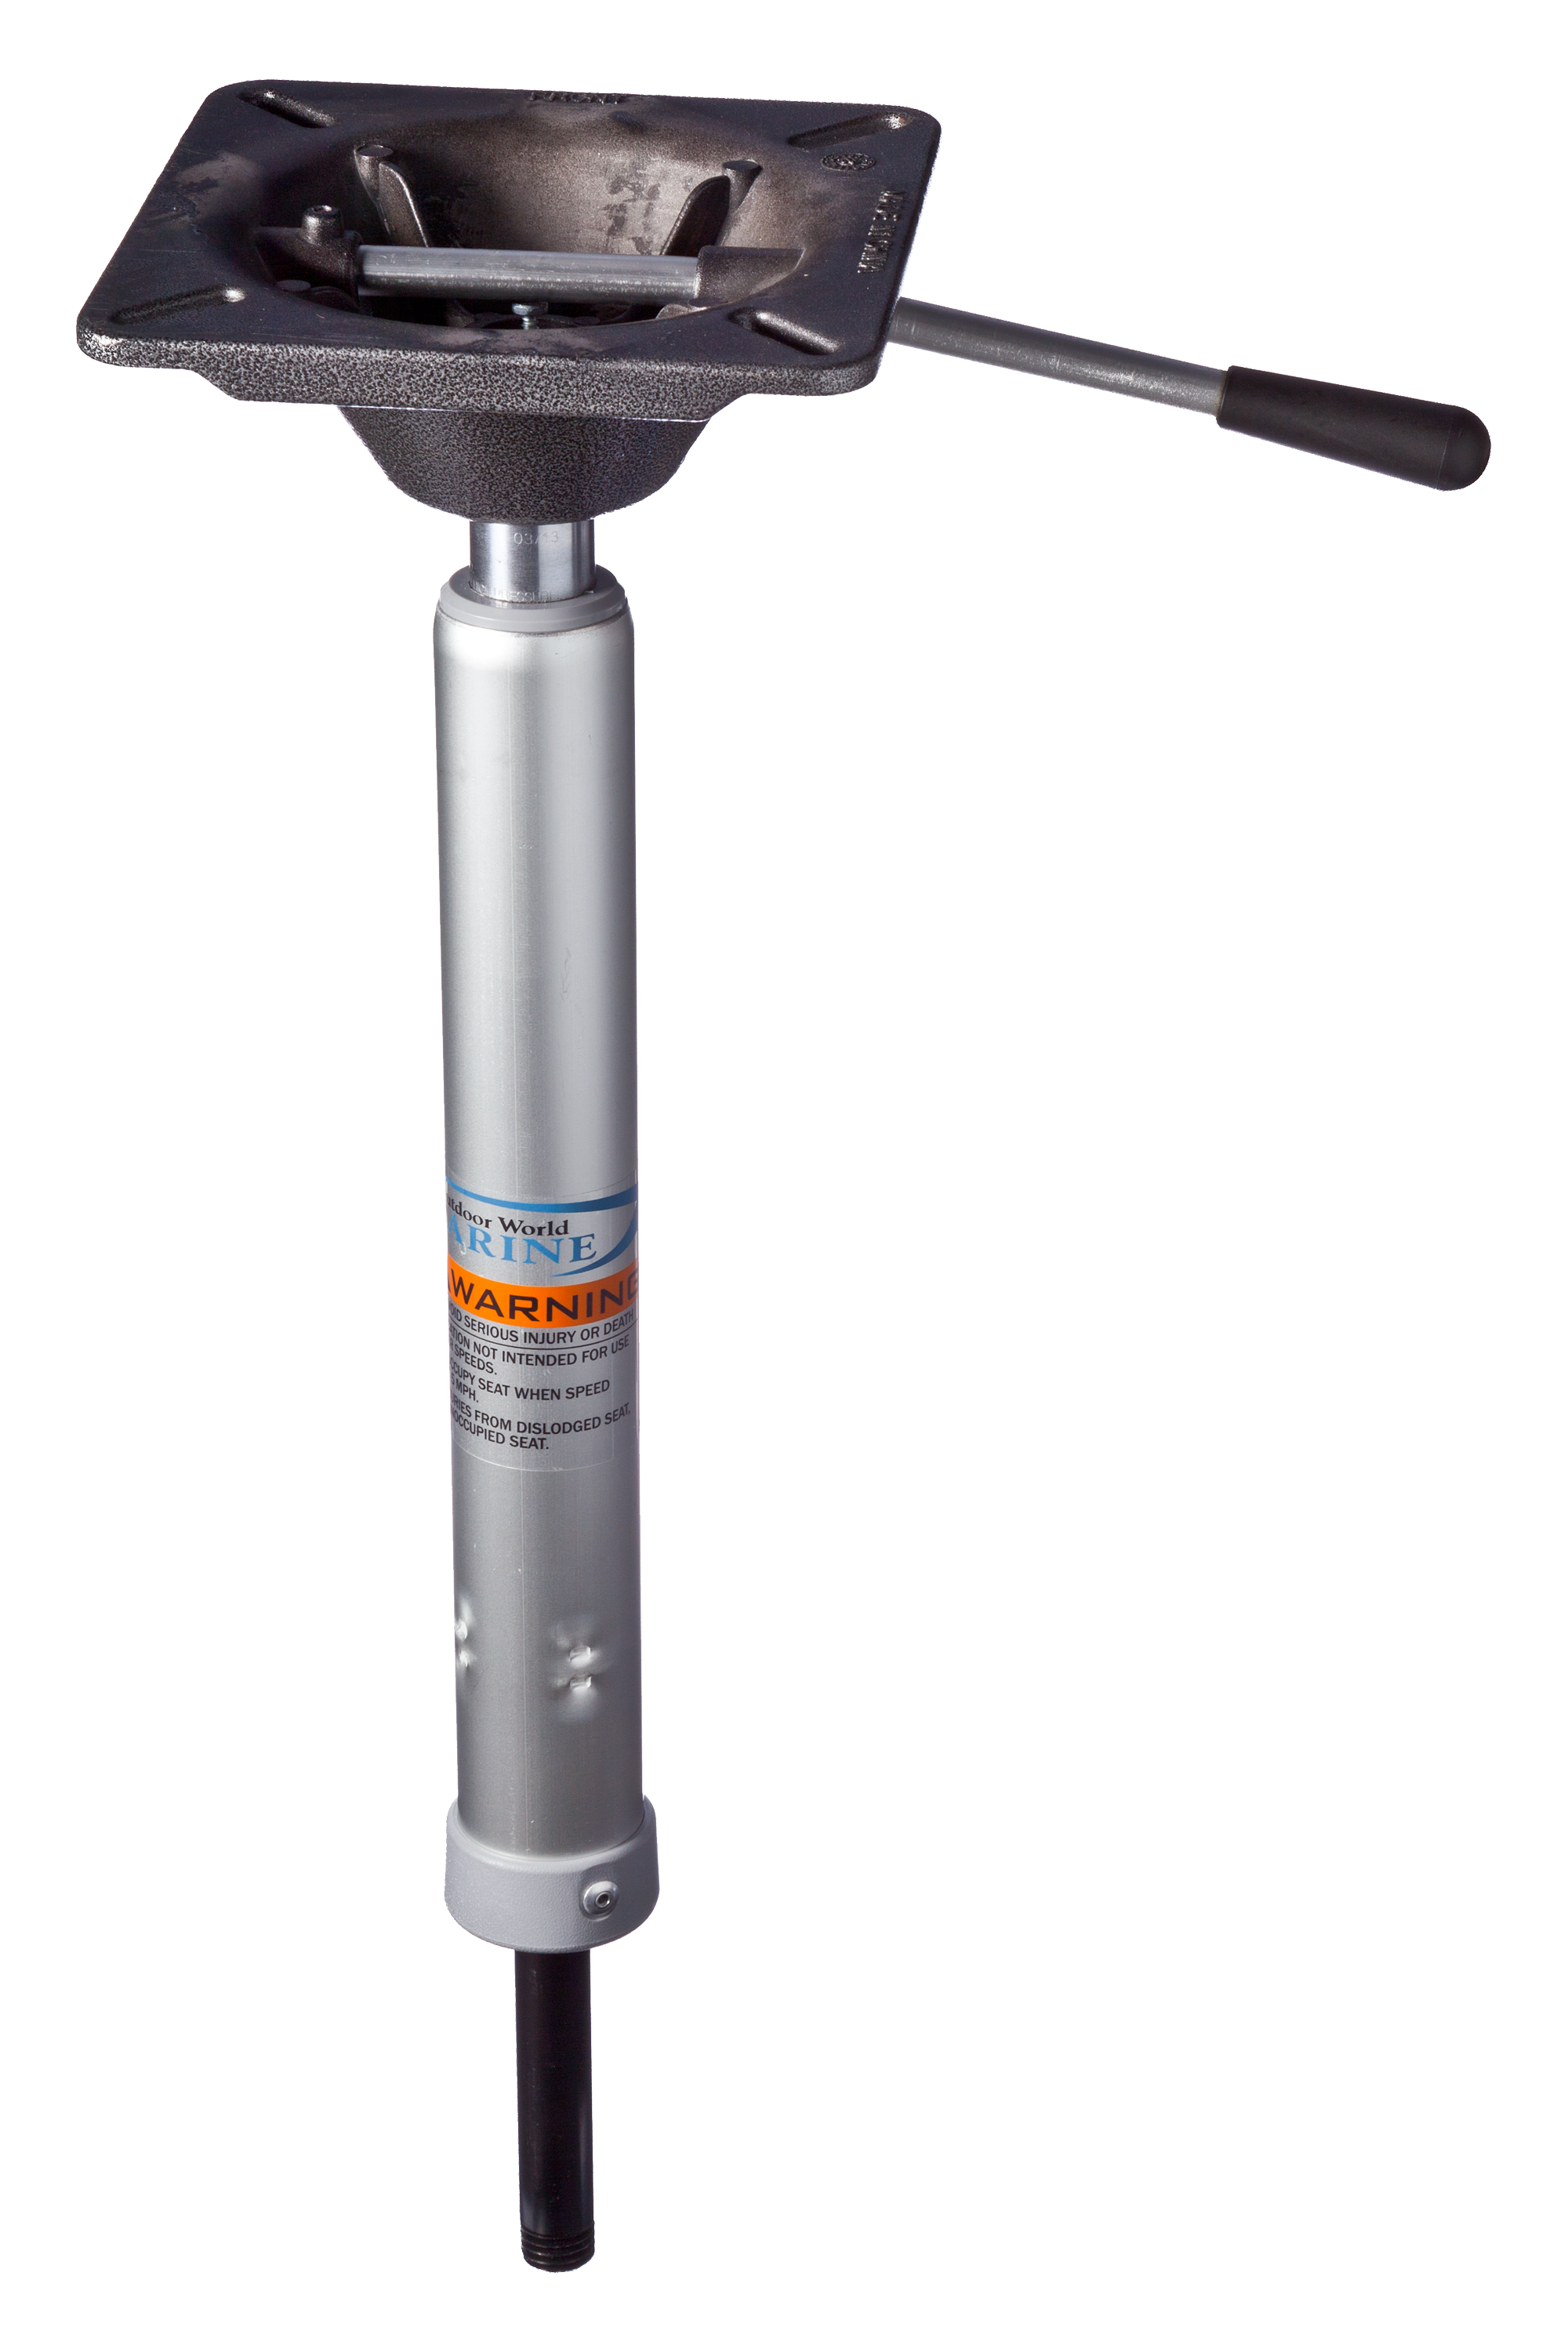 Bass Pro Shops Marine Power Pedestal and Seat Review 